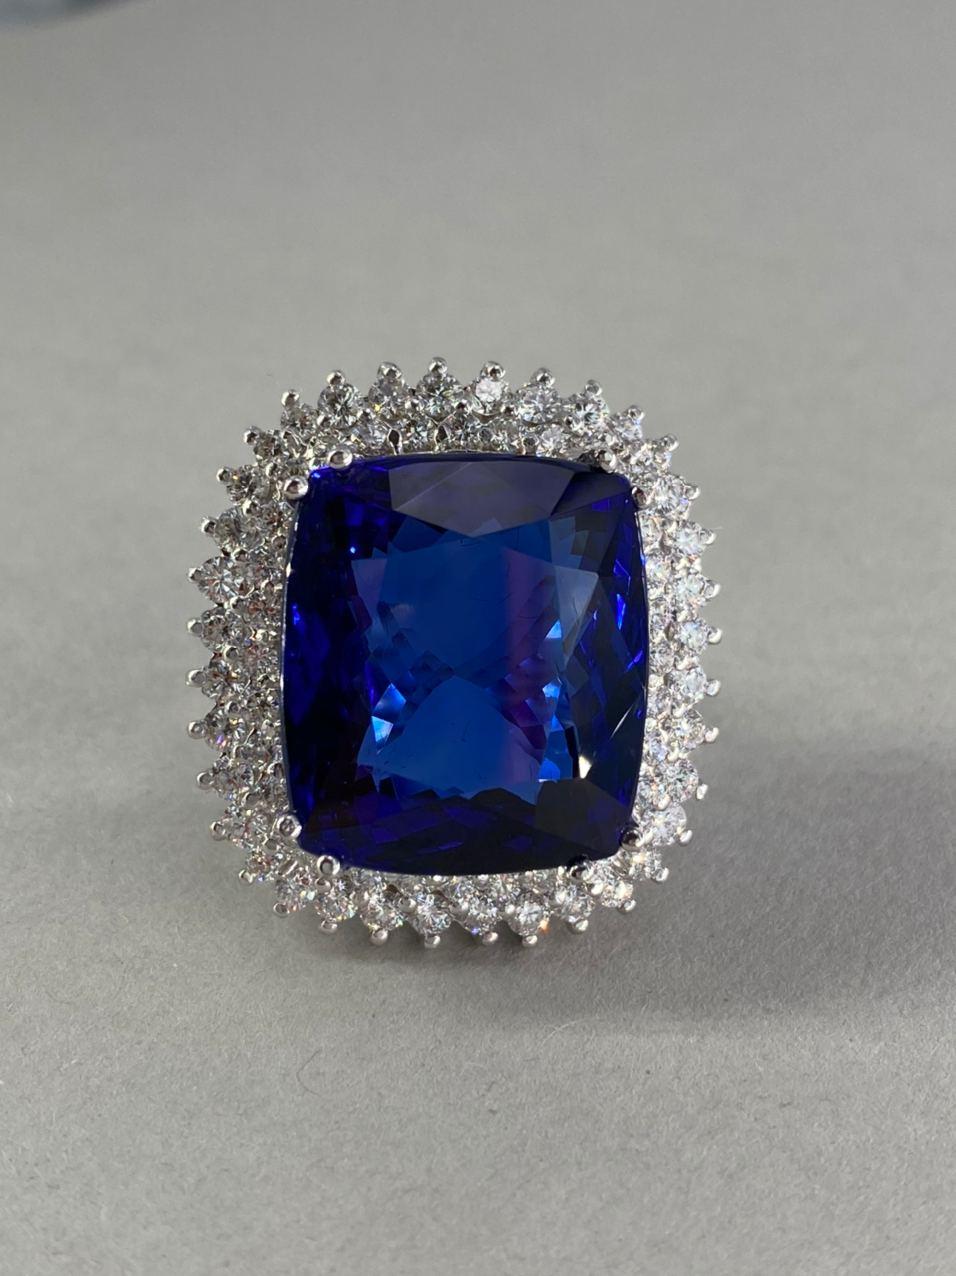 how much is the hope diamond worth